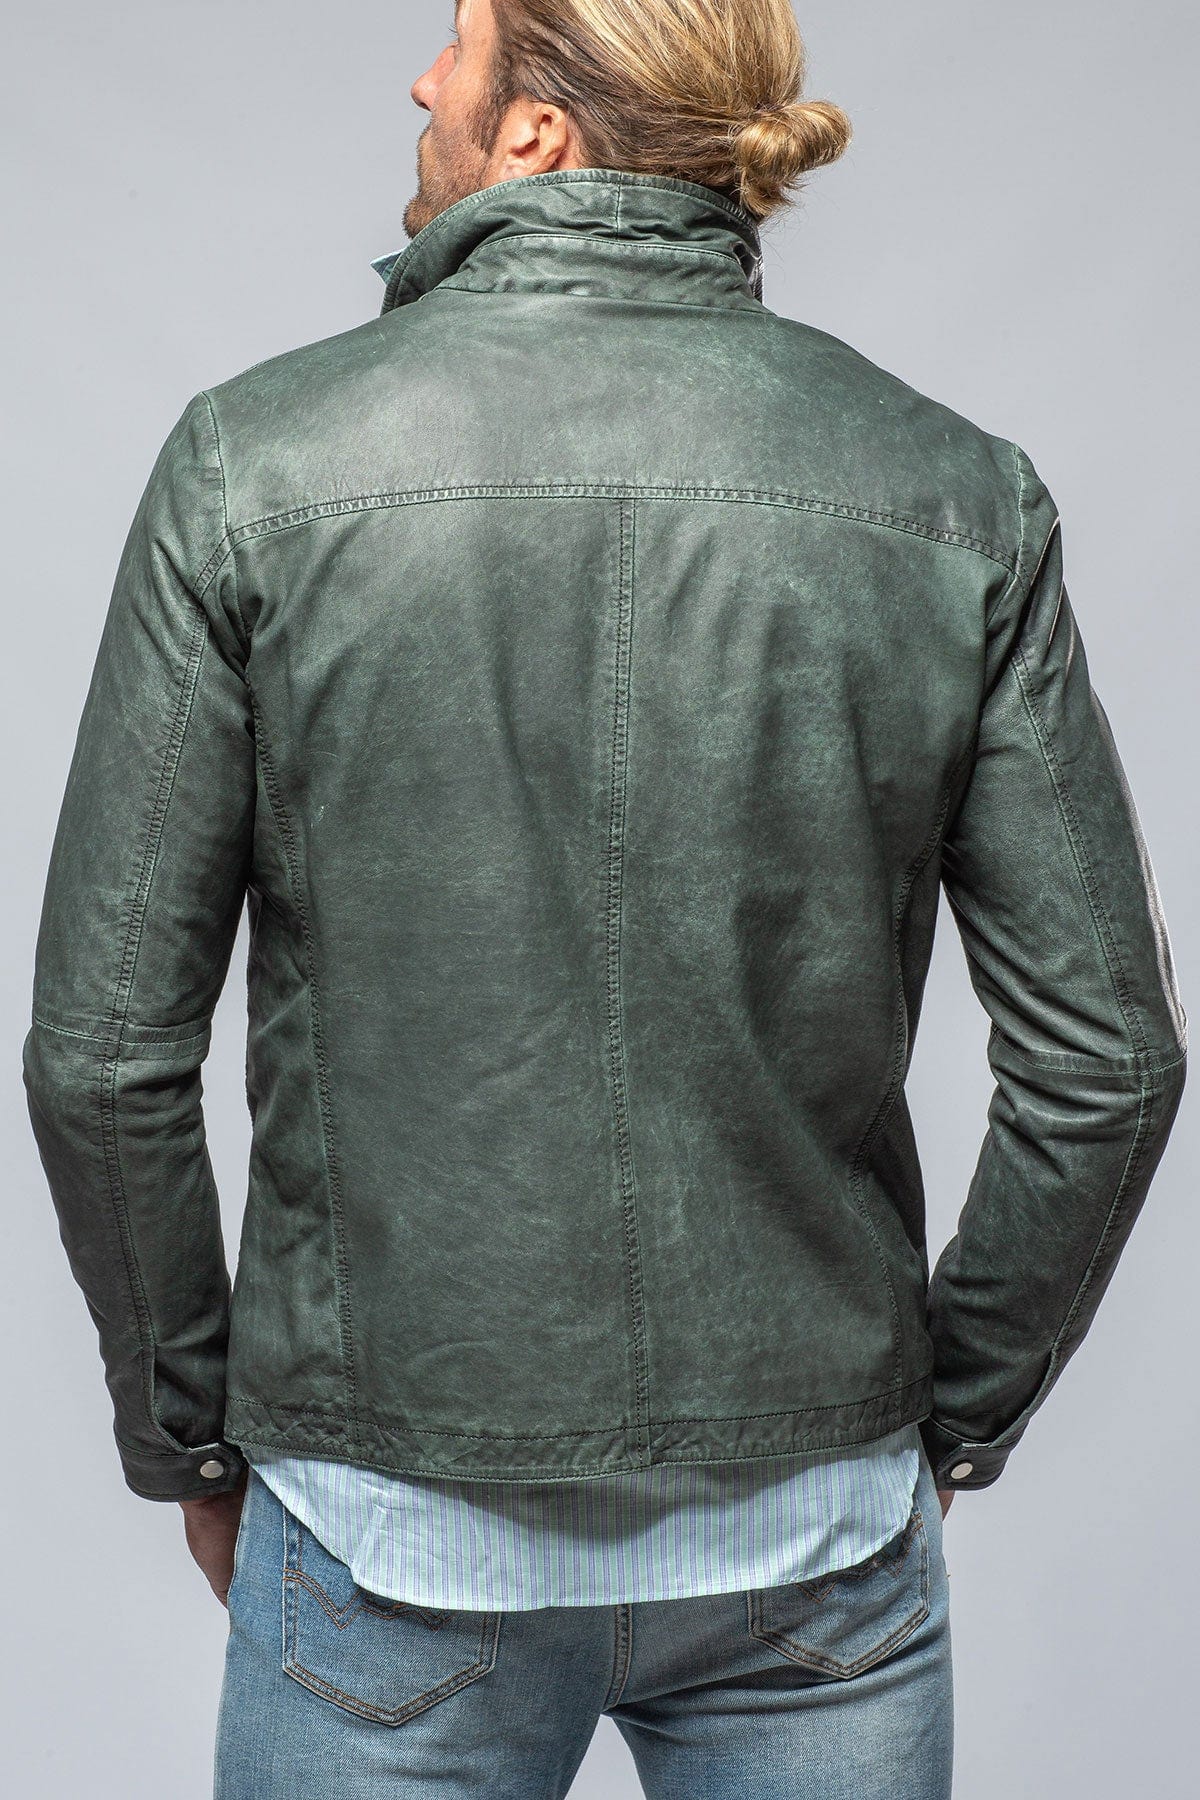 Dino Leather Jacket In Marine - AXEL'S